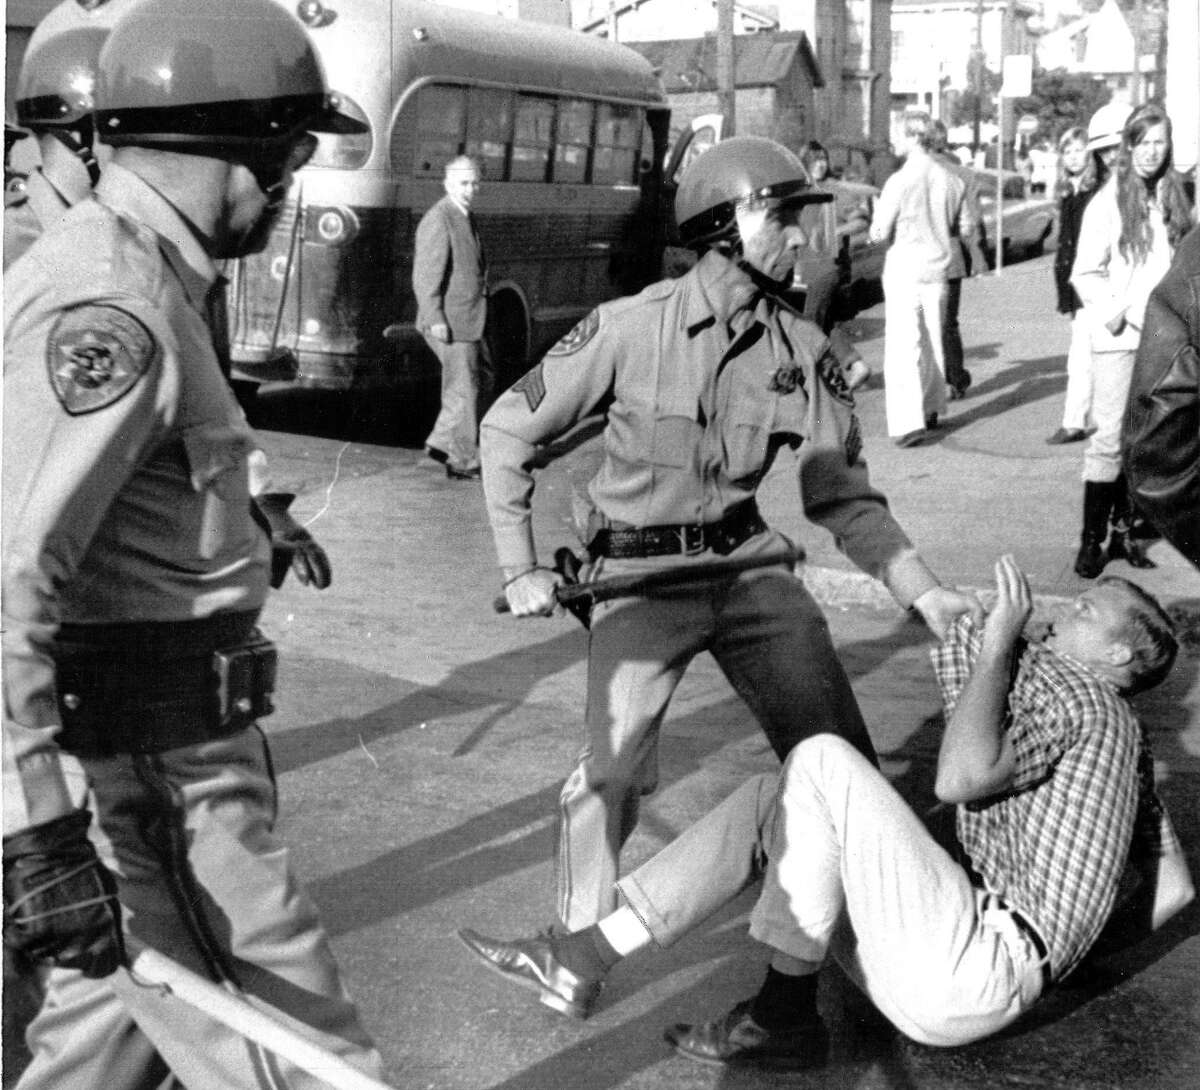 1967 Vietnam War protest photos show savagery by police in Oakland